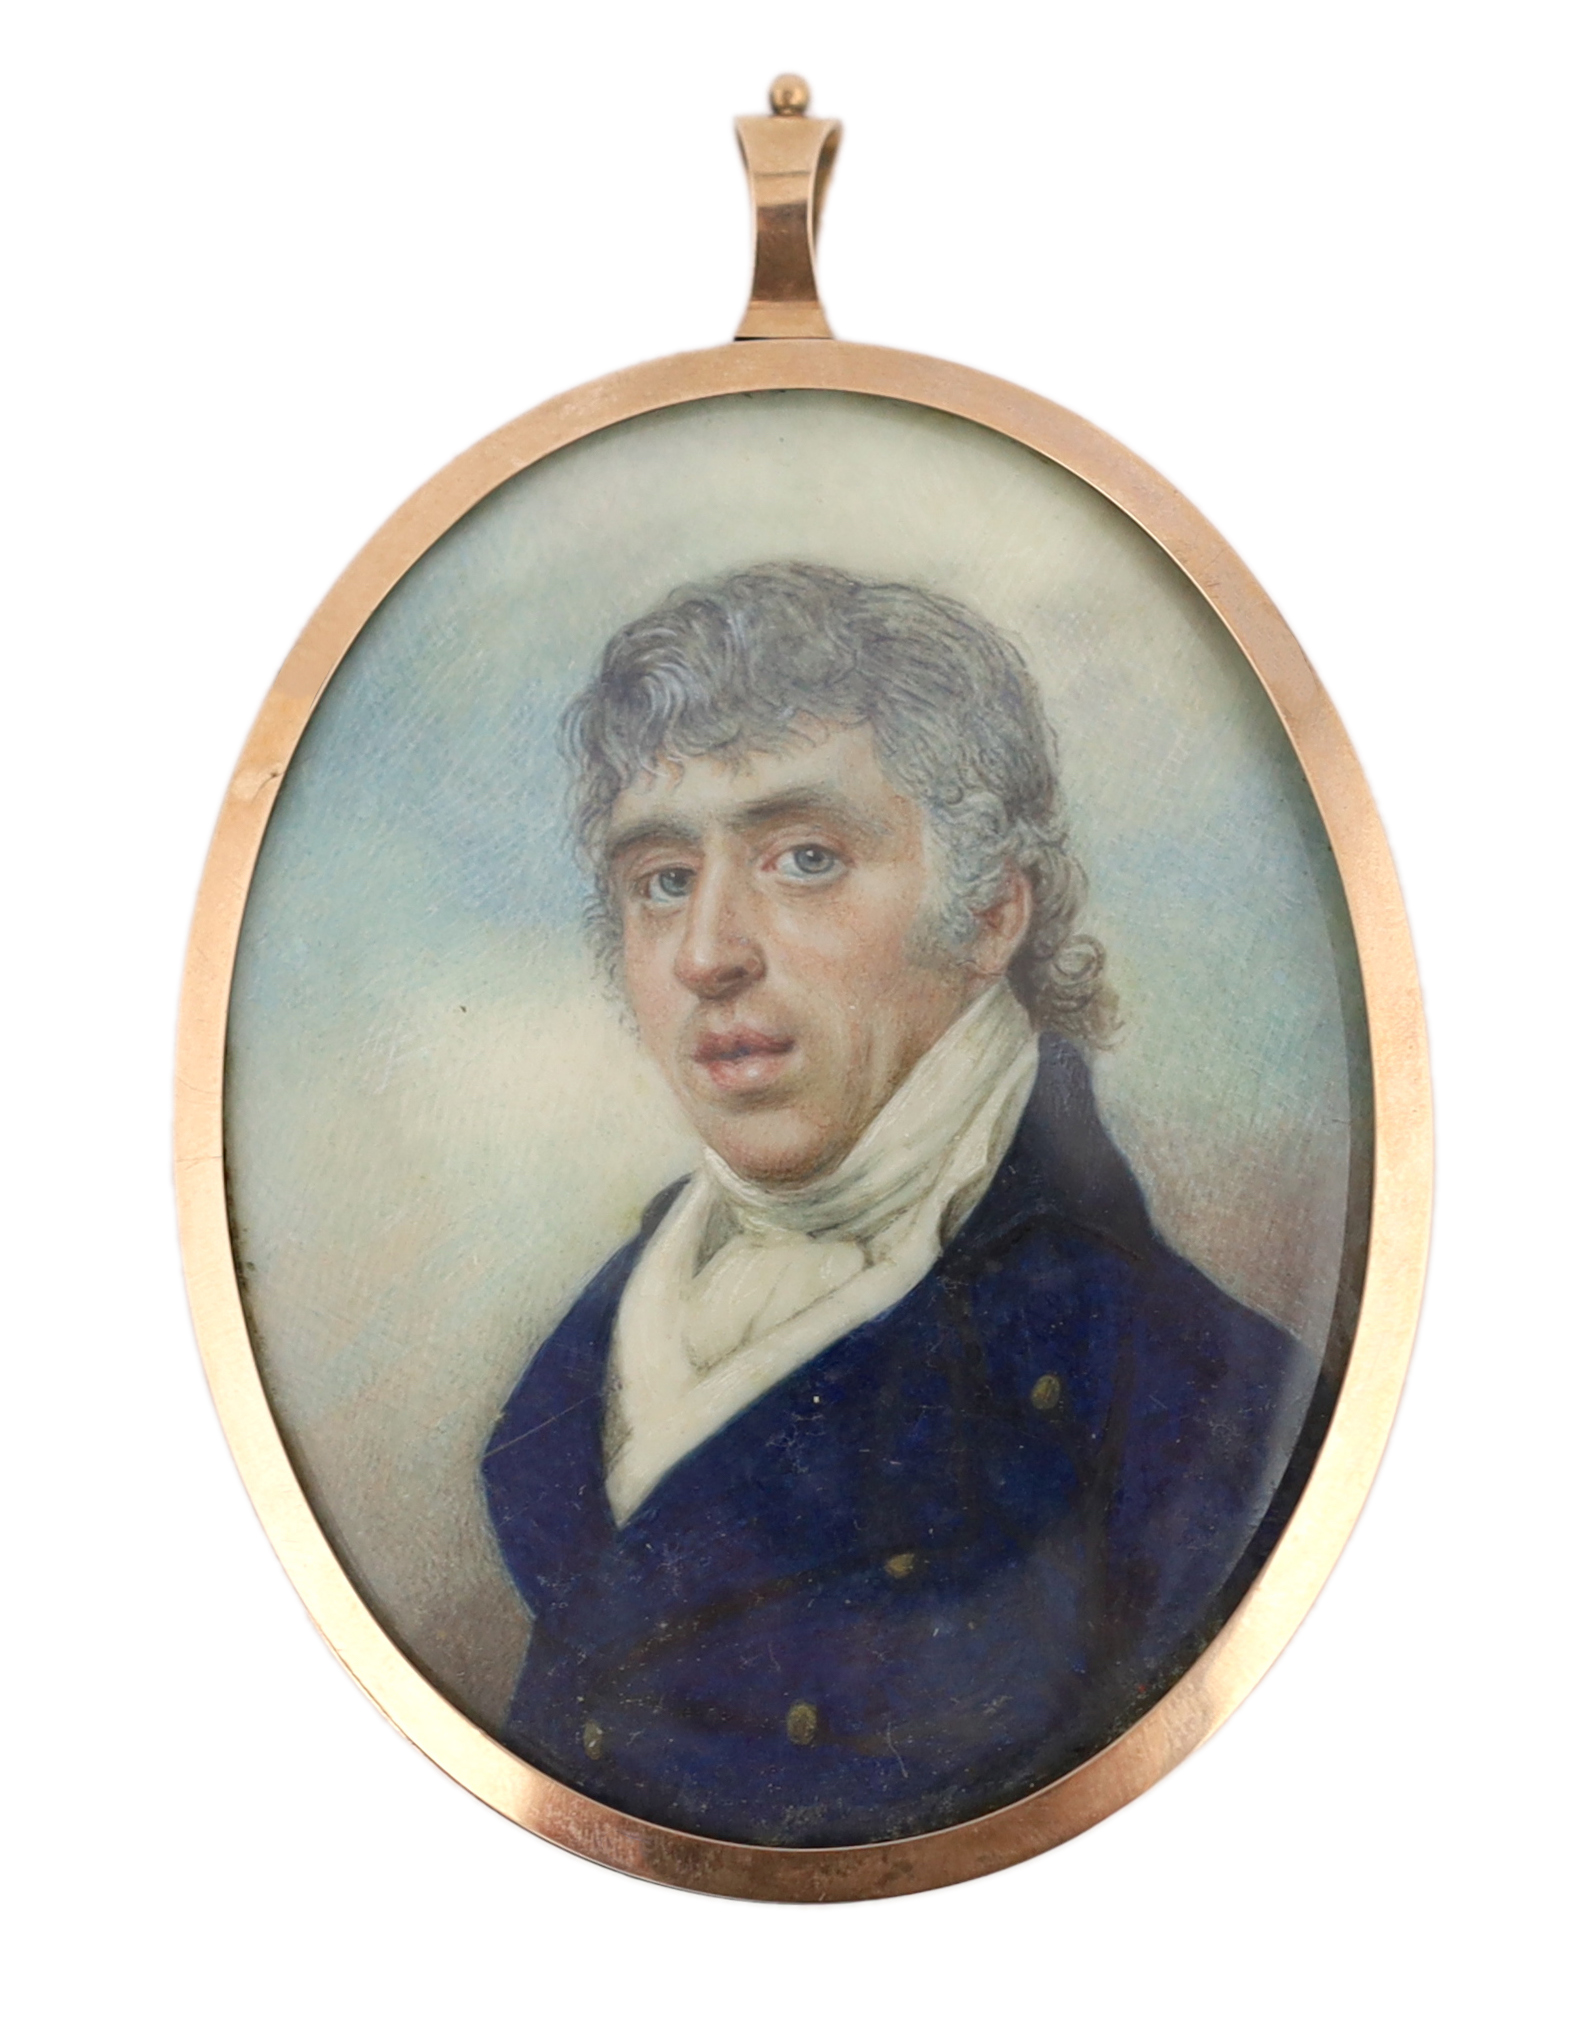 Attributed to William Wood (English, 1769-1810), Portrait miniature of a gentleman, watercolour on ivory, 7.1 x 5.6cm. CITES Submission reference WDQ3333E